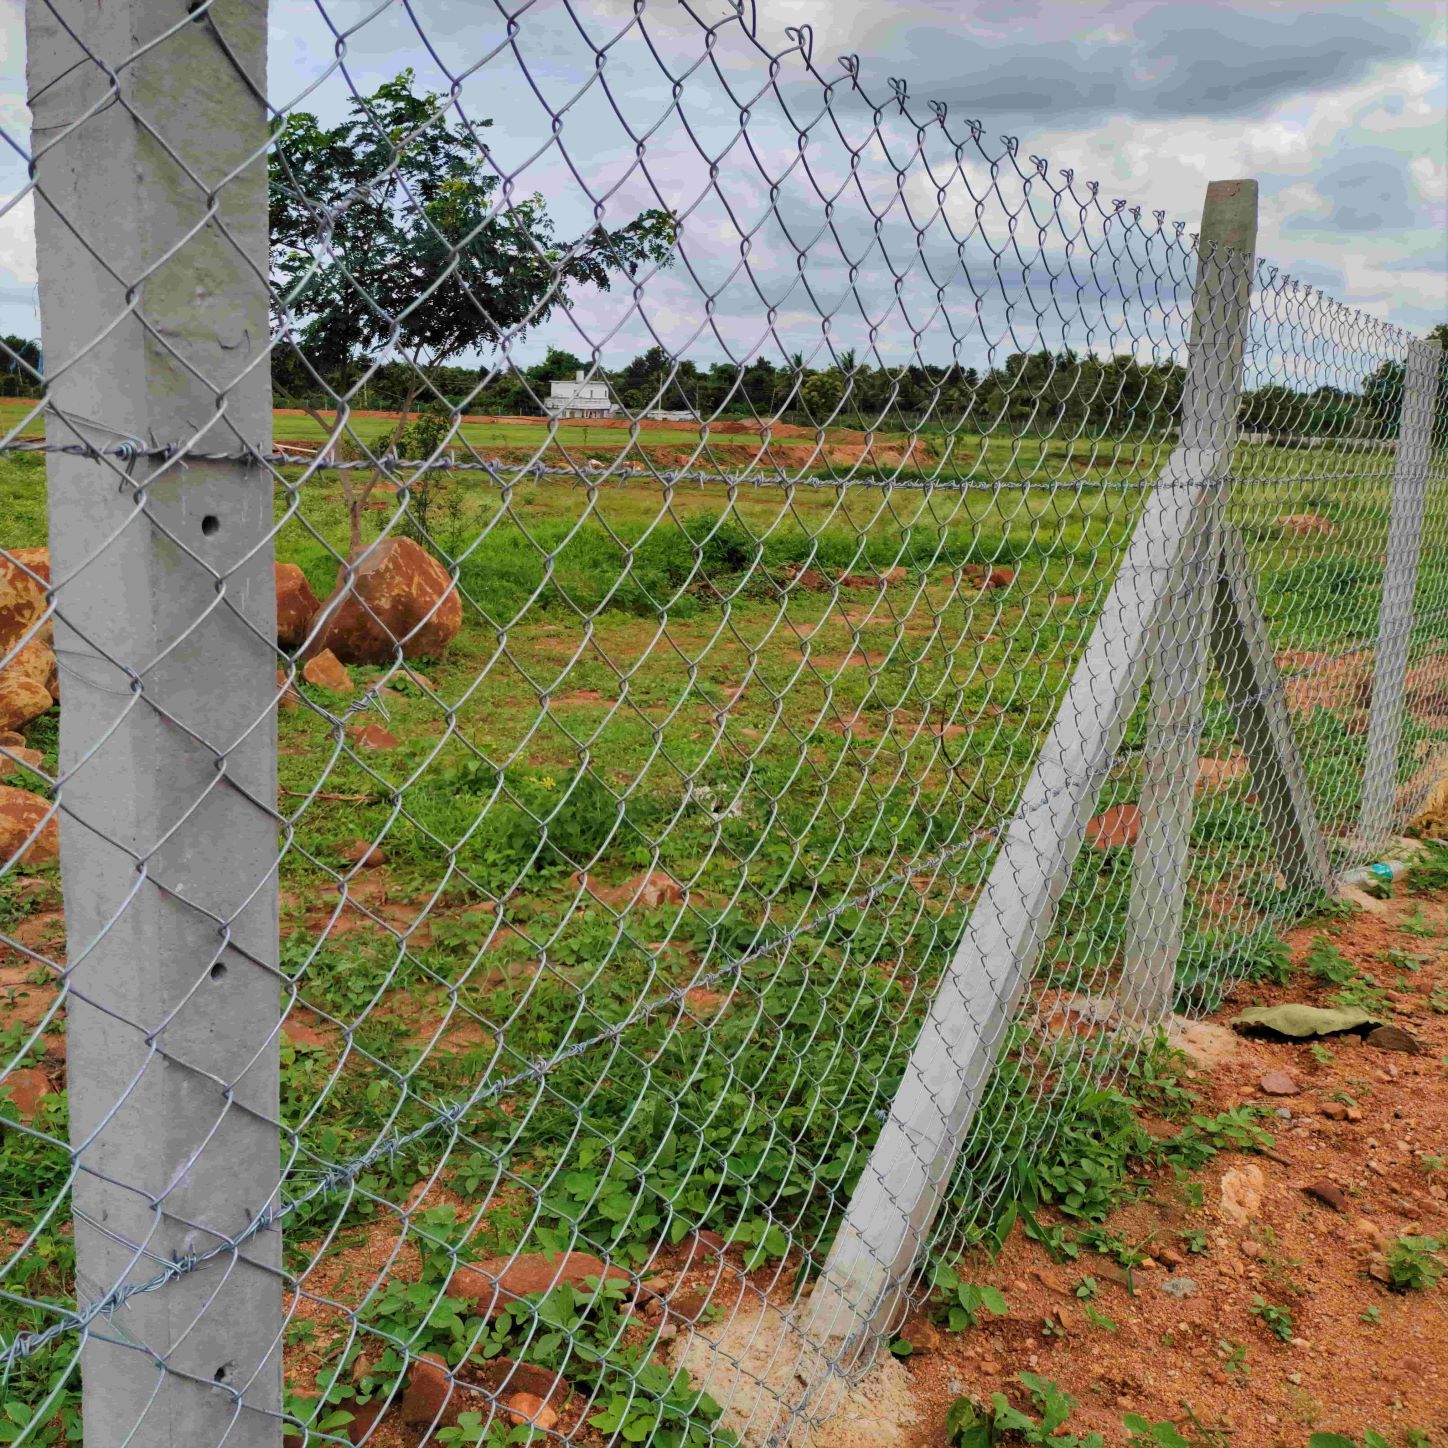 Empowering Farmers with Reliable Chain Link Solutions